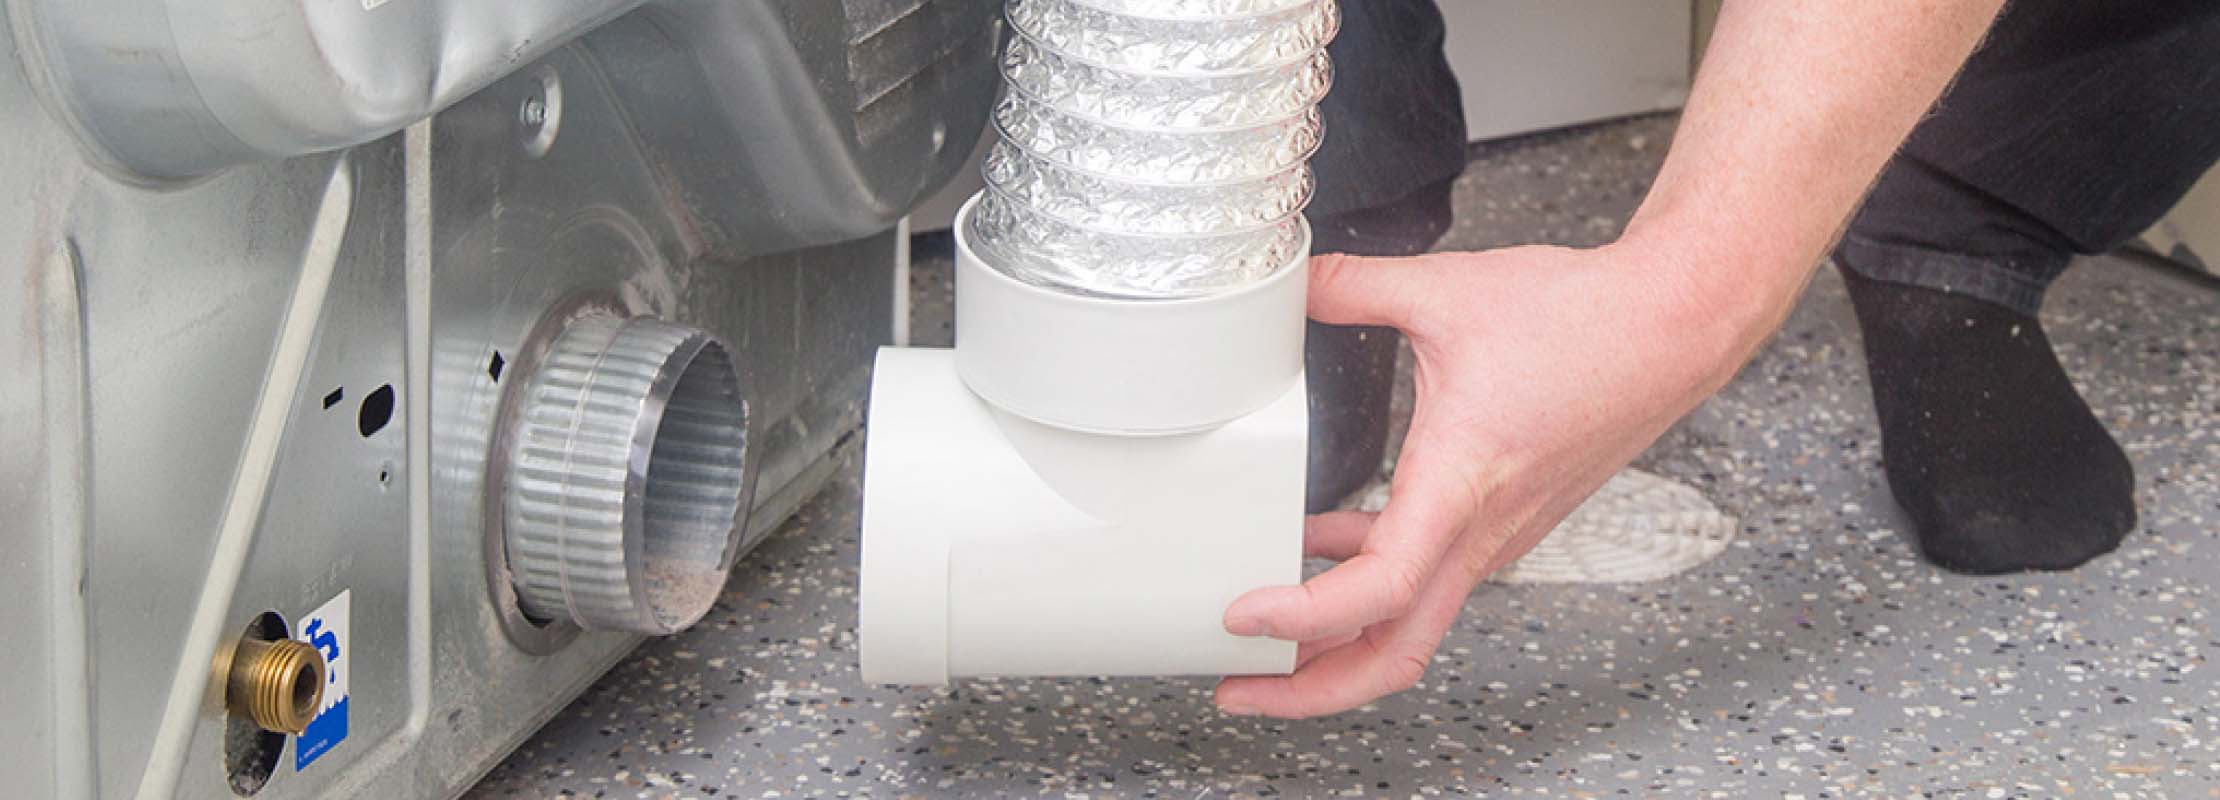 how to clean dryer vent